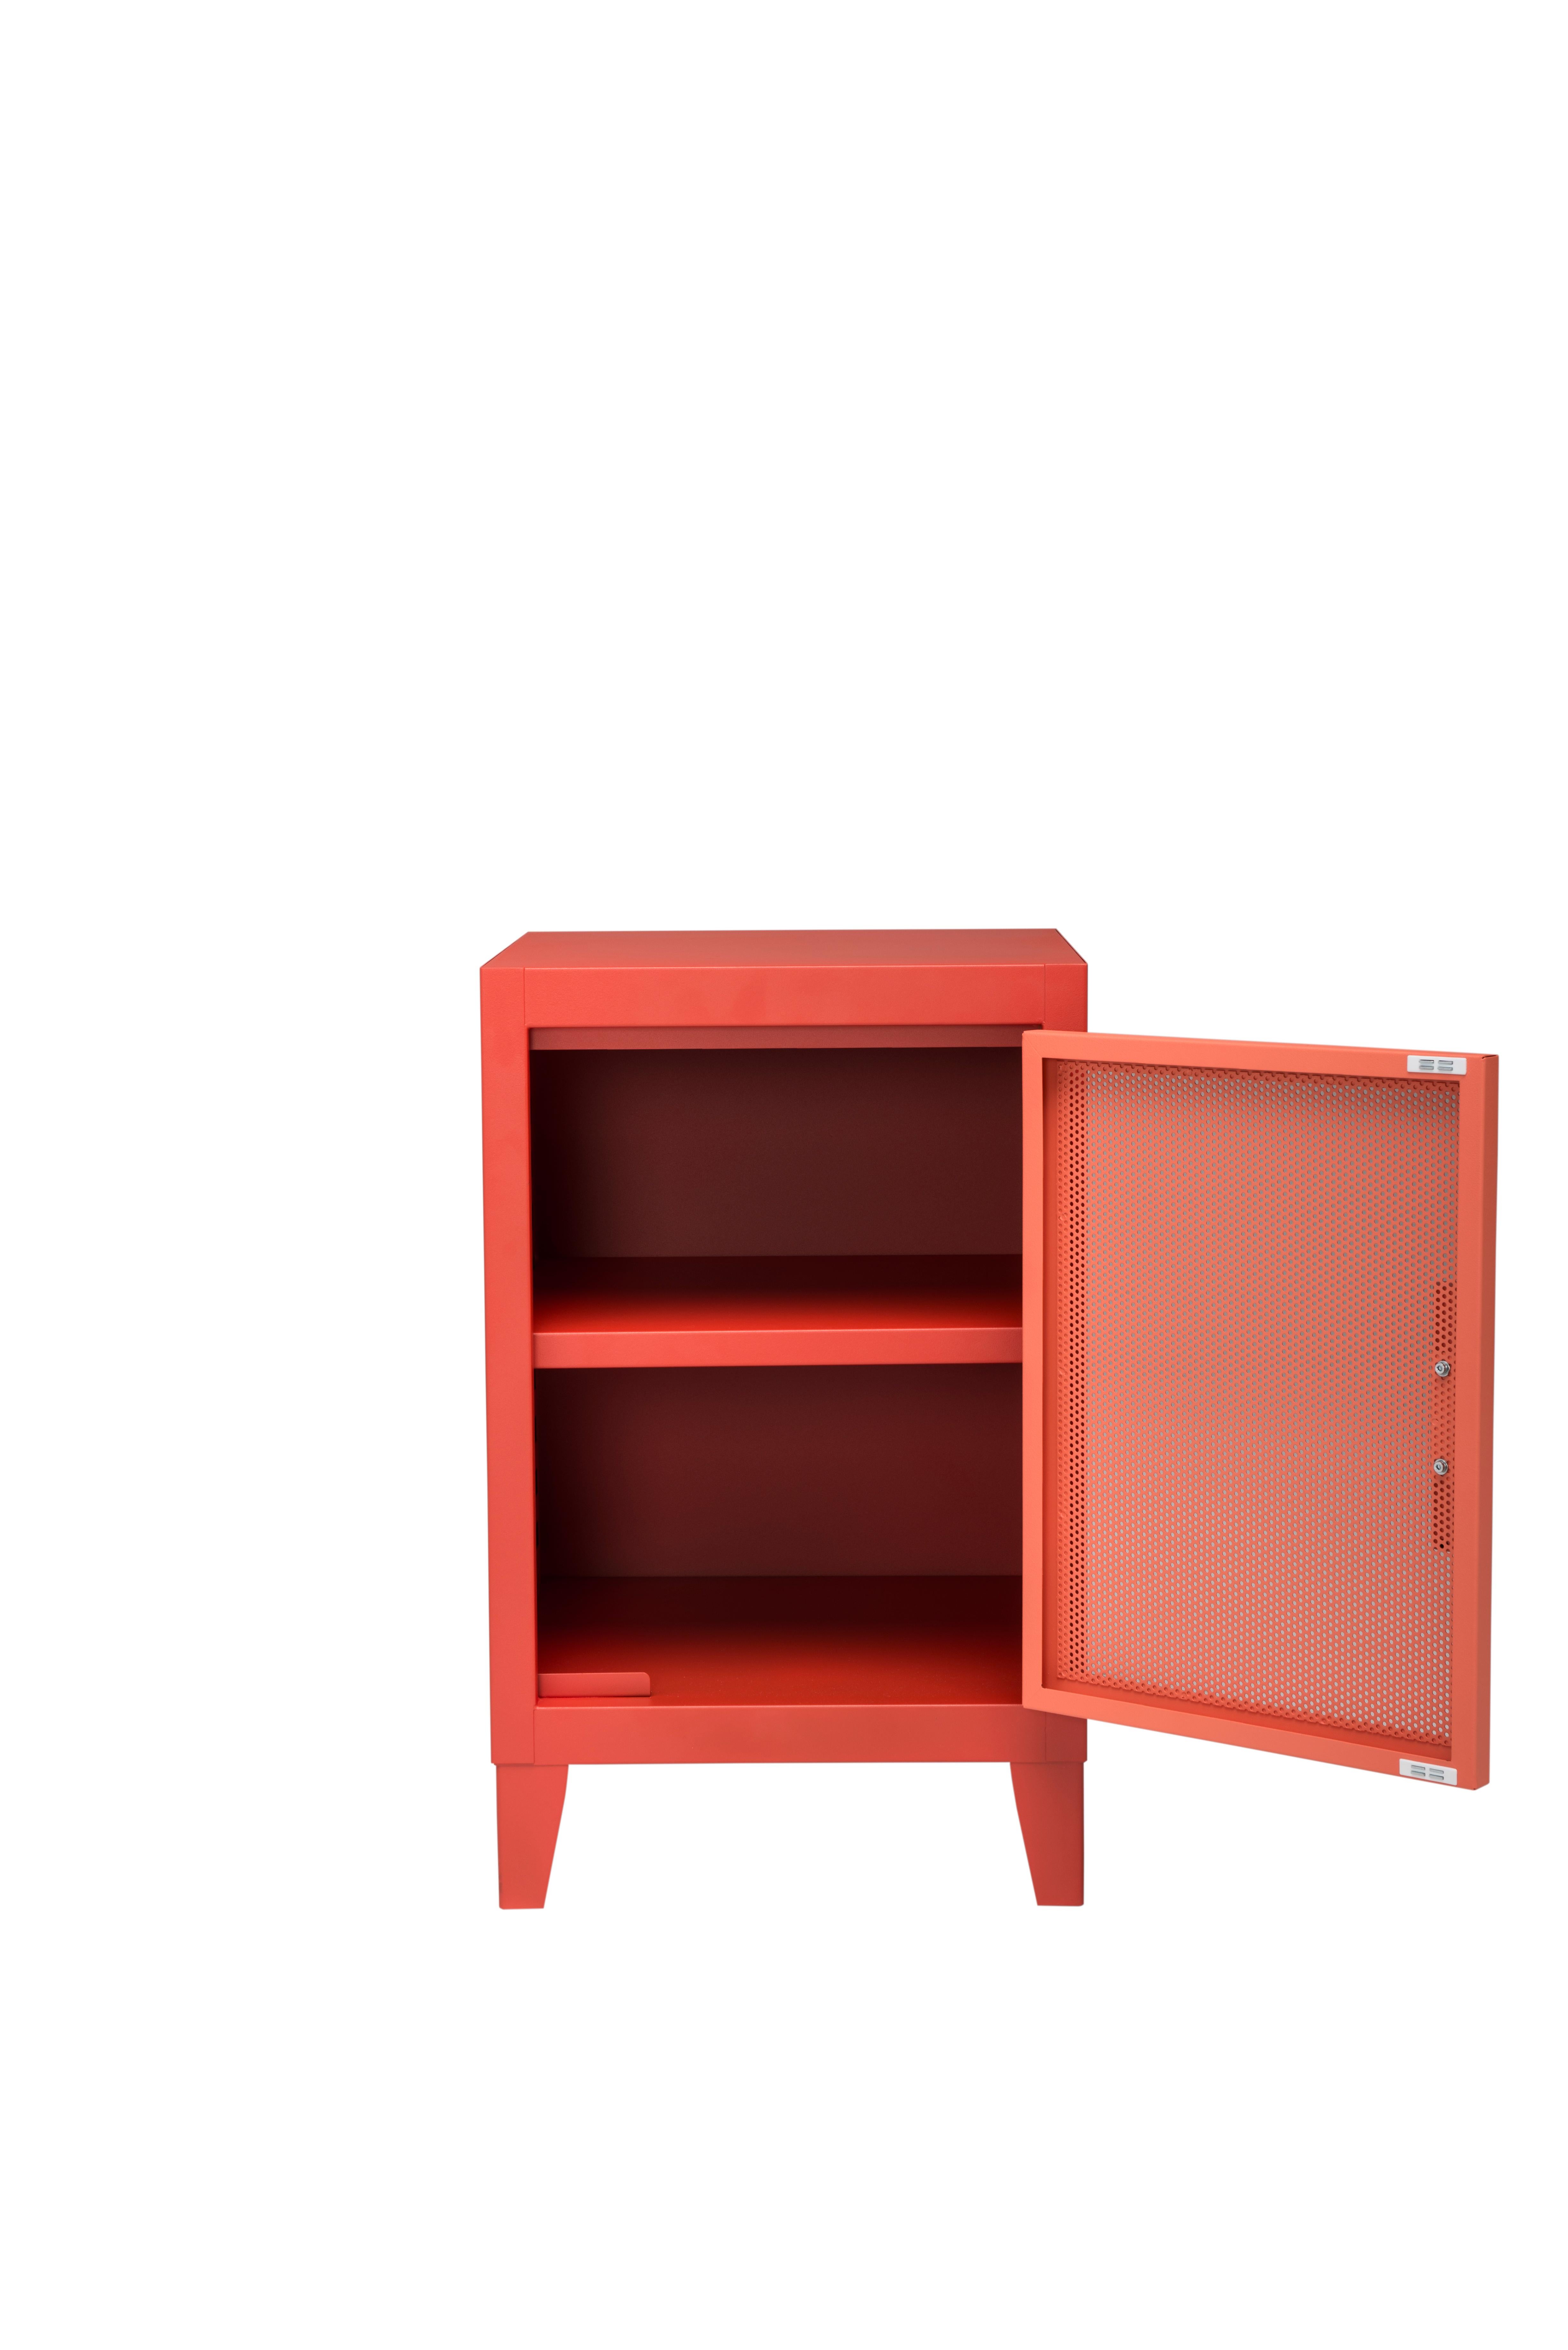 For Sale: Red (Poivron) B1 H64 Perforated Mini Steel Locker in Essential Colors by Tolix 3